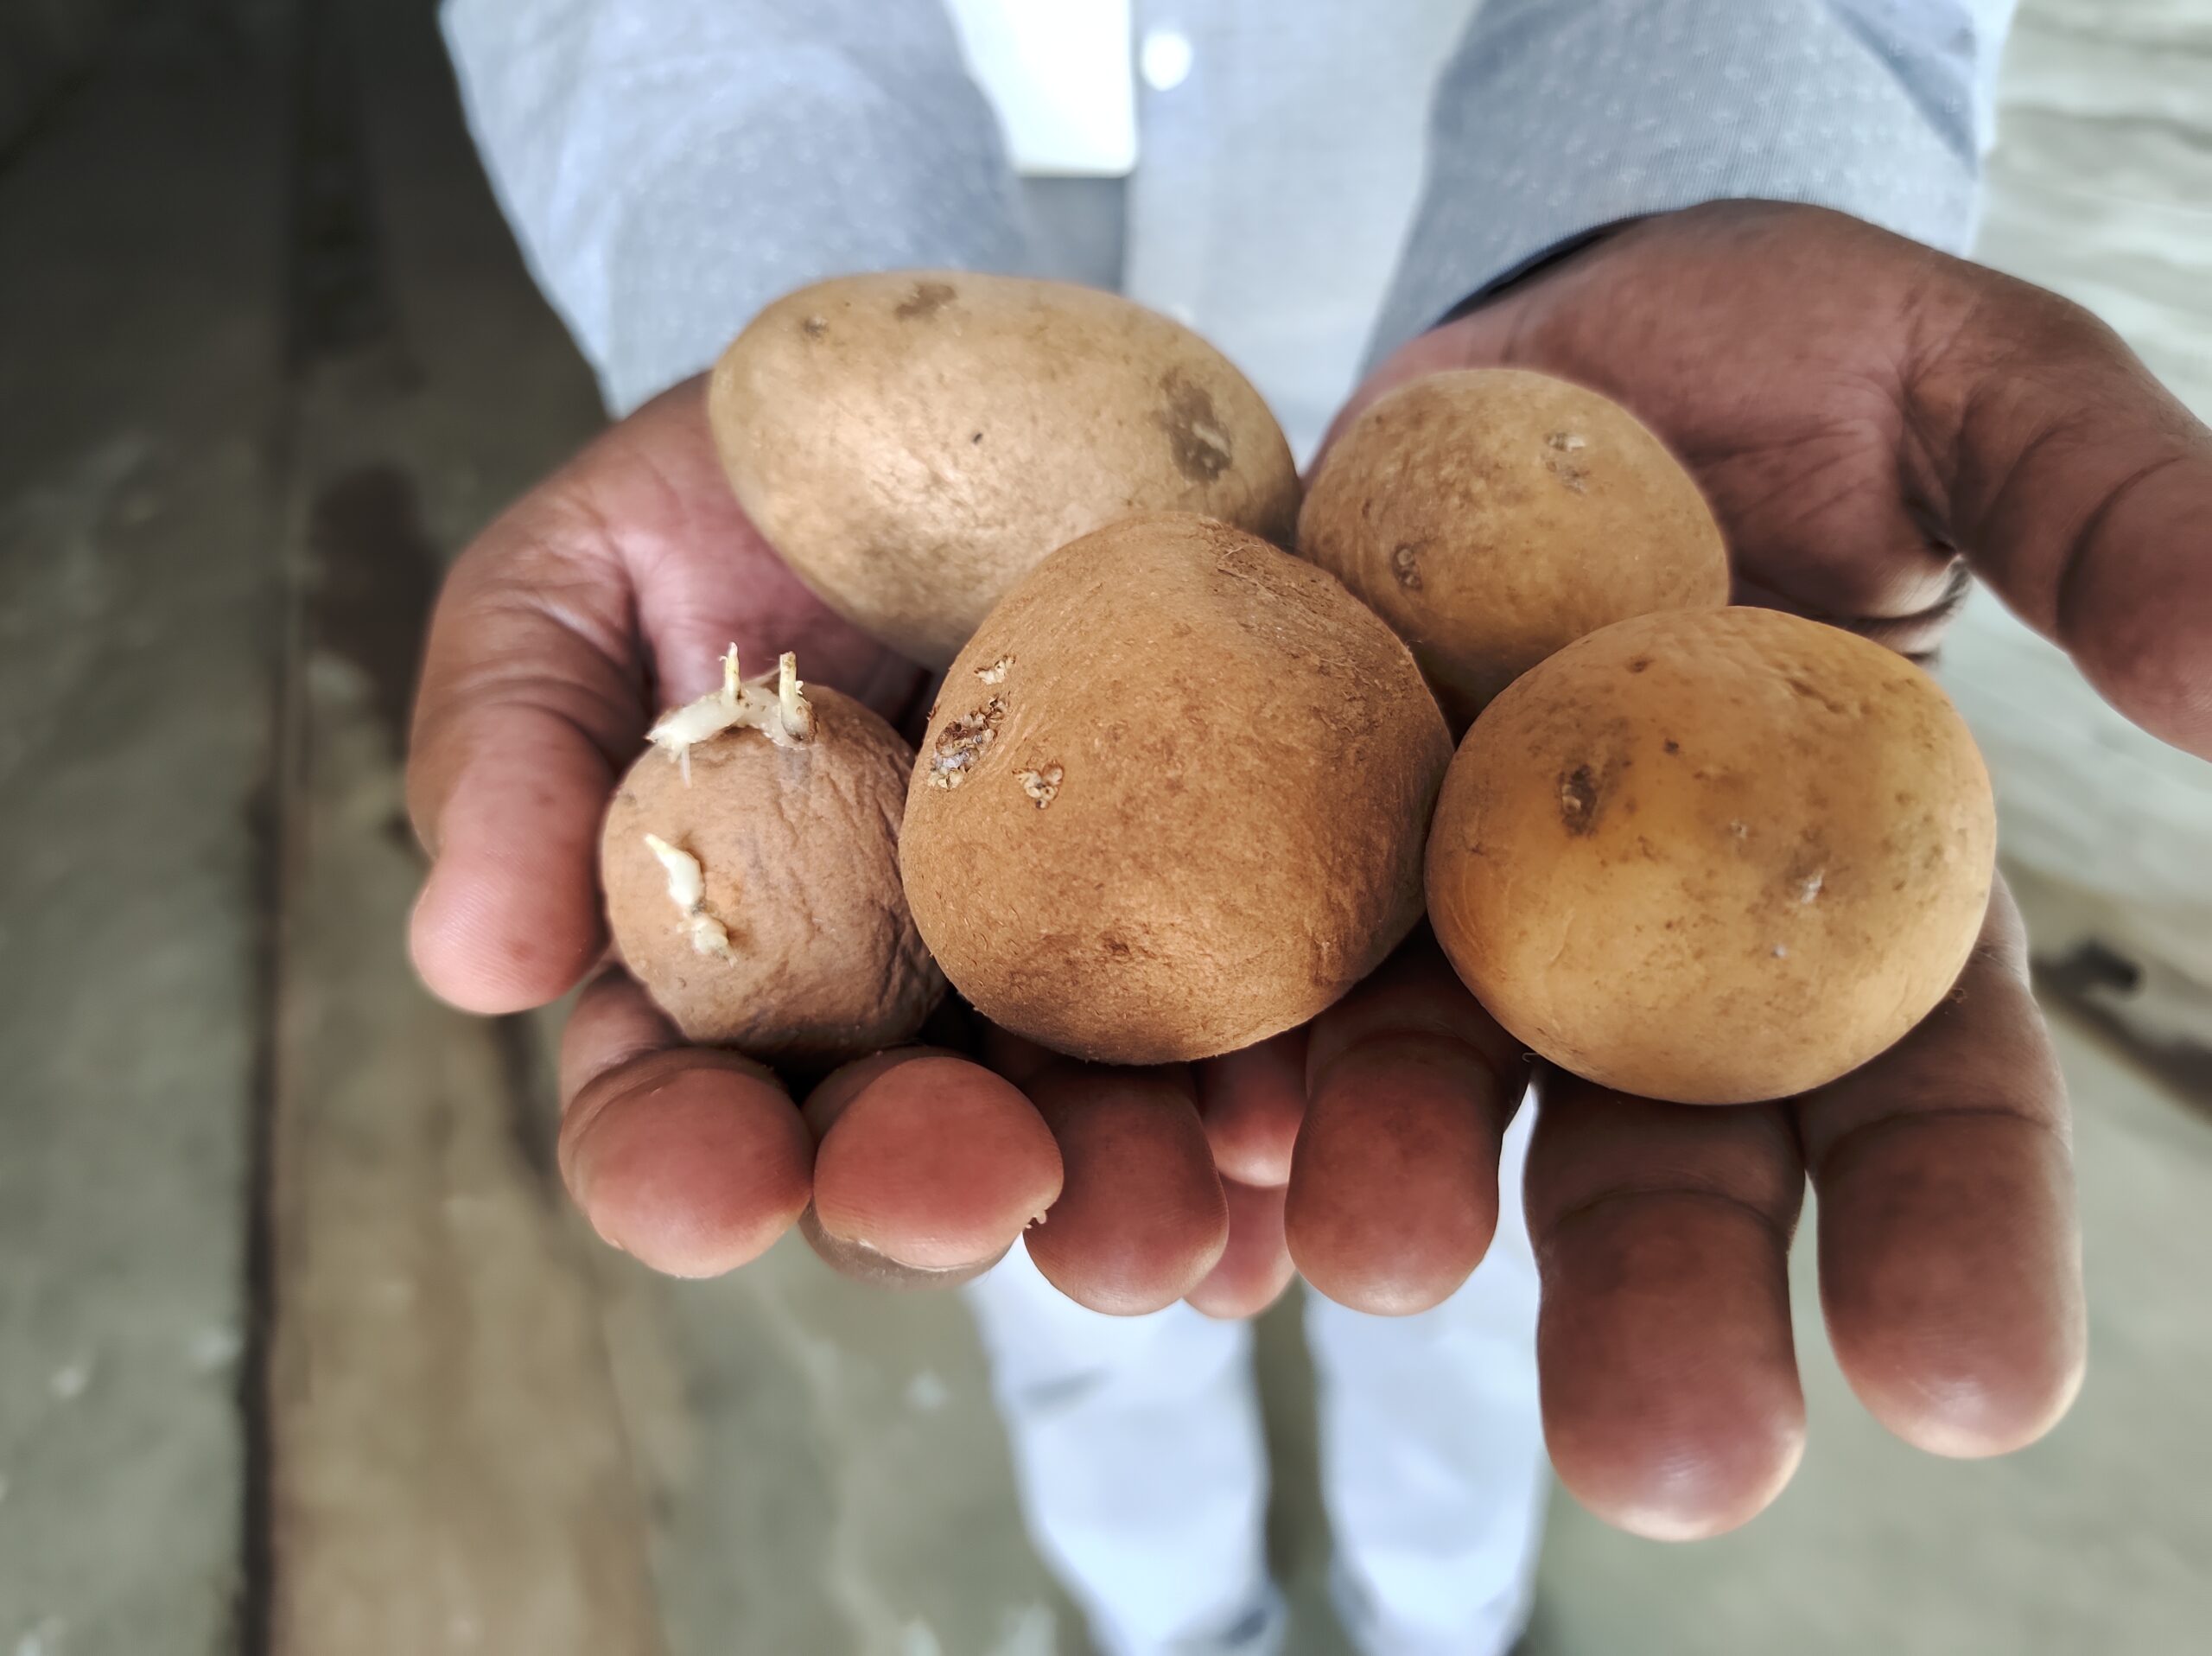 A person holding five small potatoes in their hands.